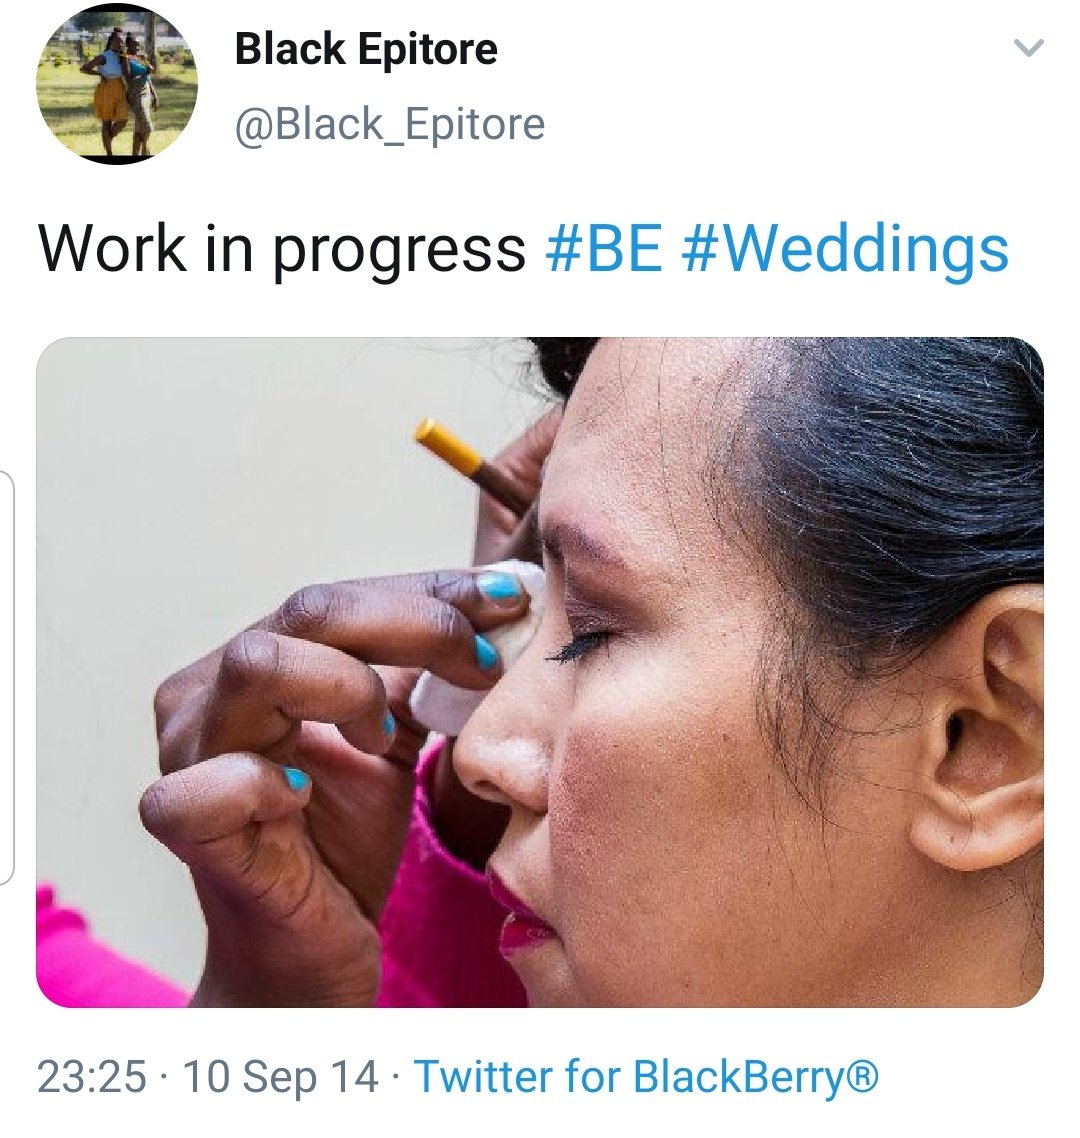 She asked that we style her bridesmaids for her big day. One referral after another & our Saturday mornings were fully booked, doing makeup for weddings with skills learnt from YouTube. This was becoming too stressful. We had to stop this business. 7/